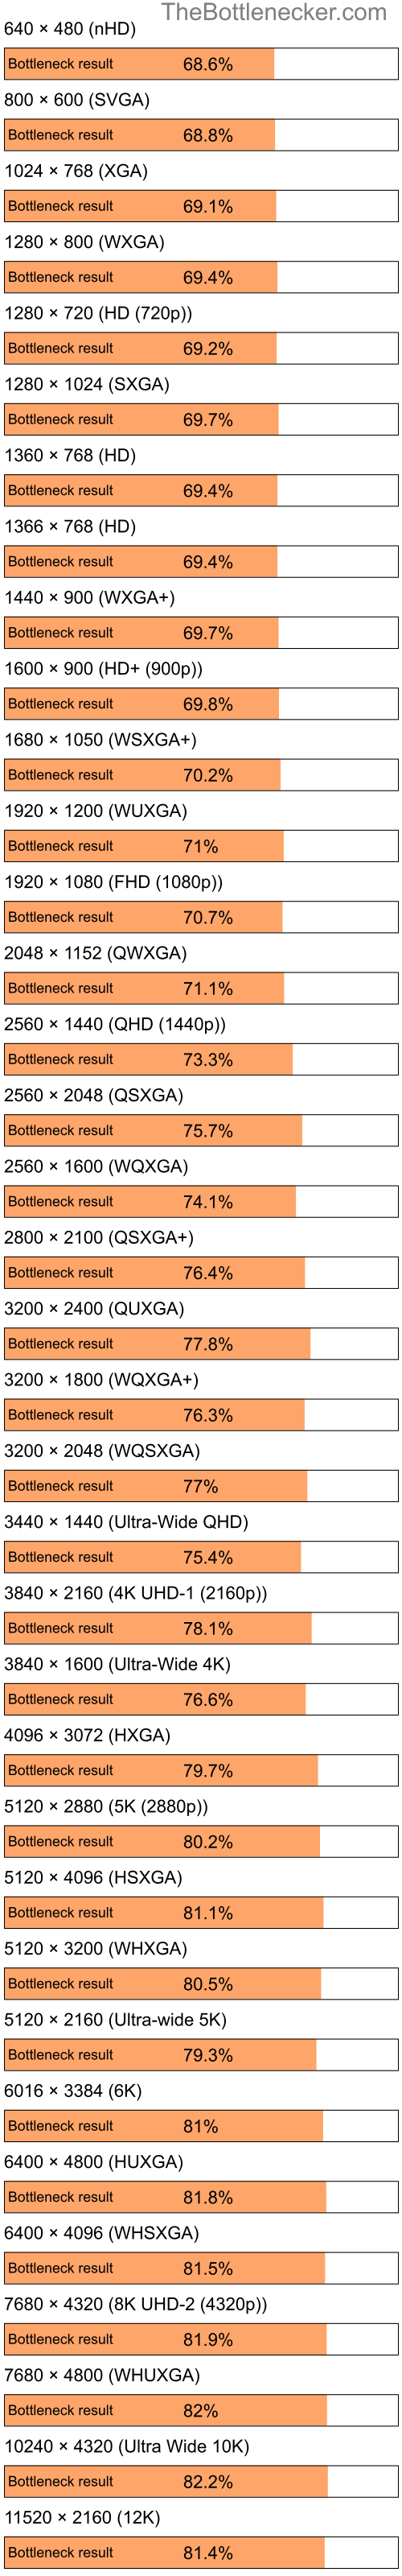 Bottleneck results by resolution for Intel Celeron M 420 and NVIDIA GeForce 210 in Graphic Card Intense Tasks